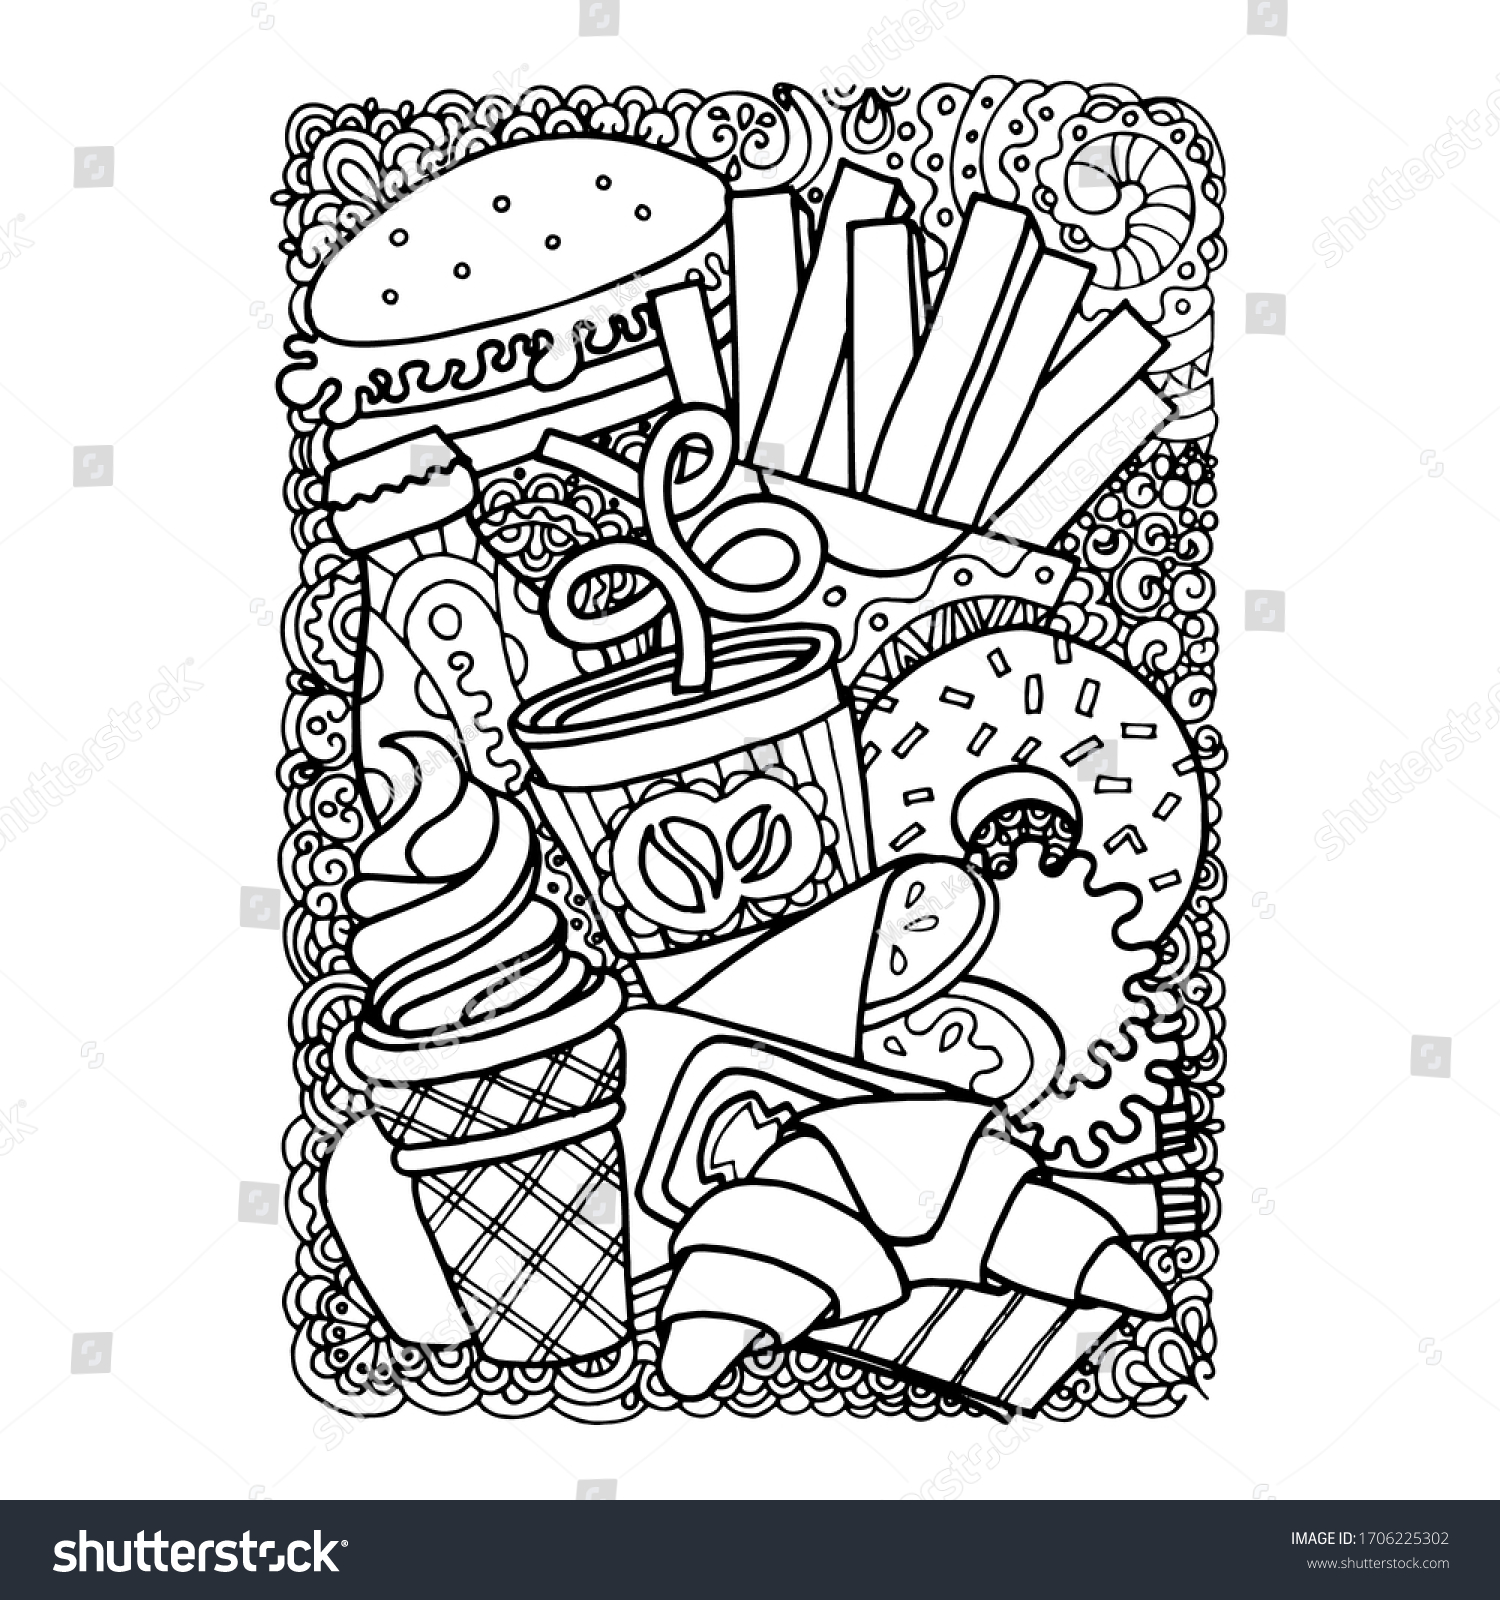 Fast food coloring page pen drawing stock vector royalty free